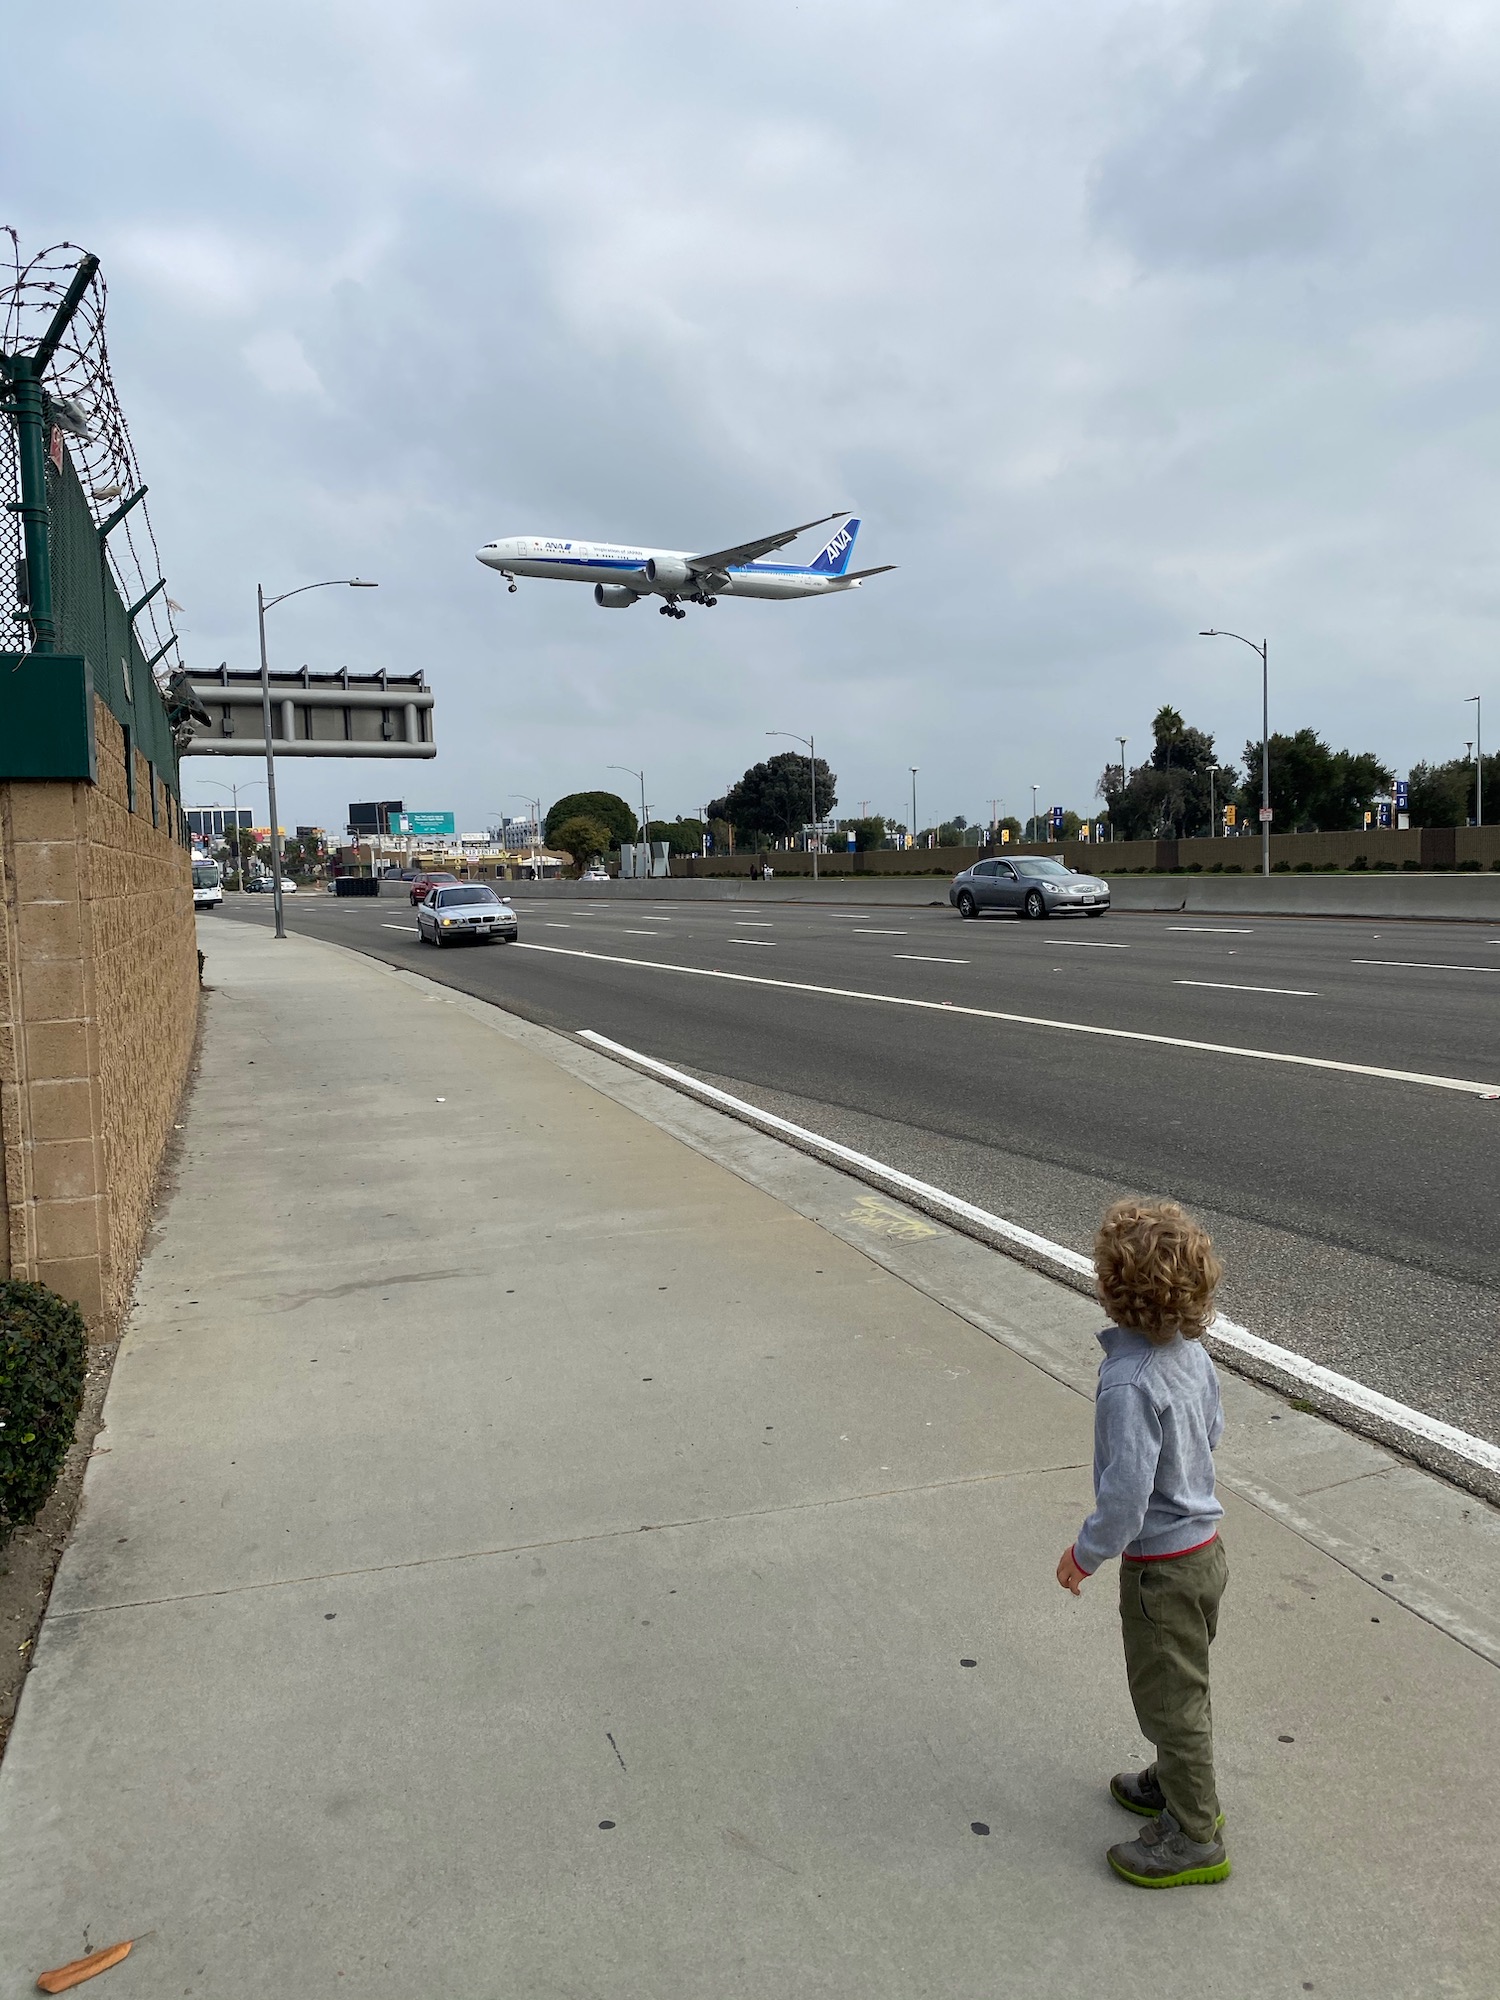 a child looking at an airplane flying over a road